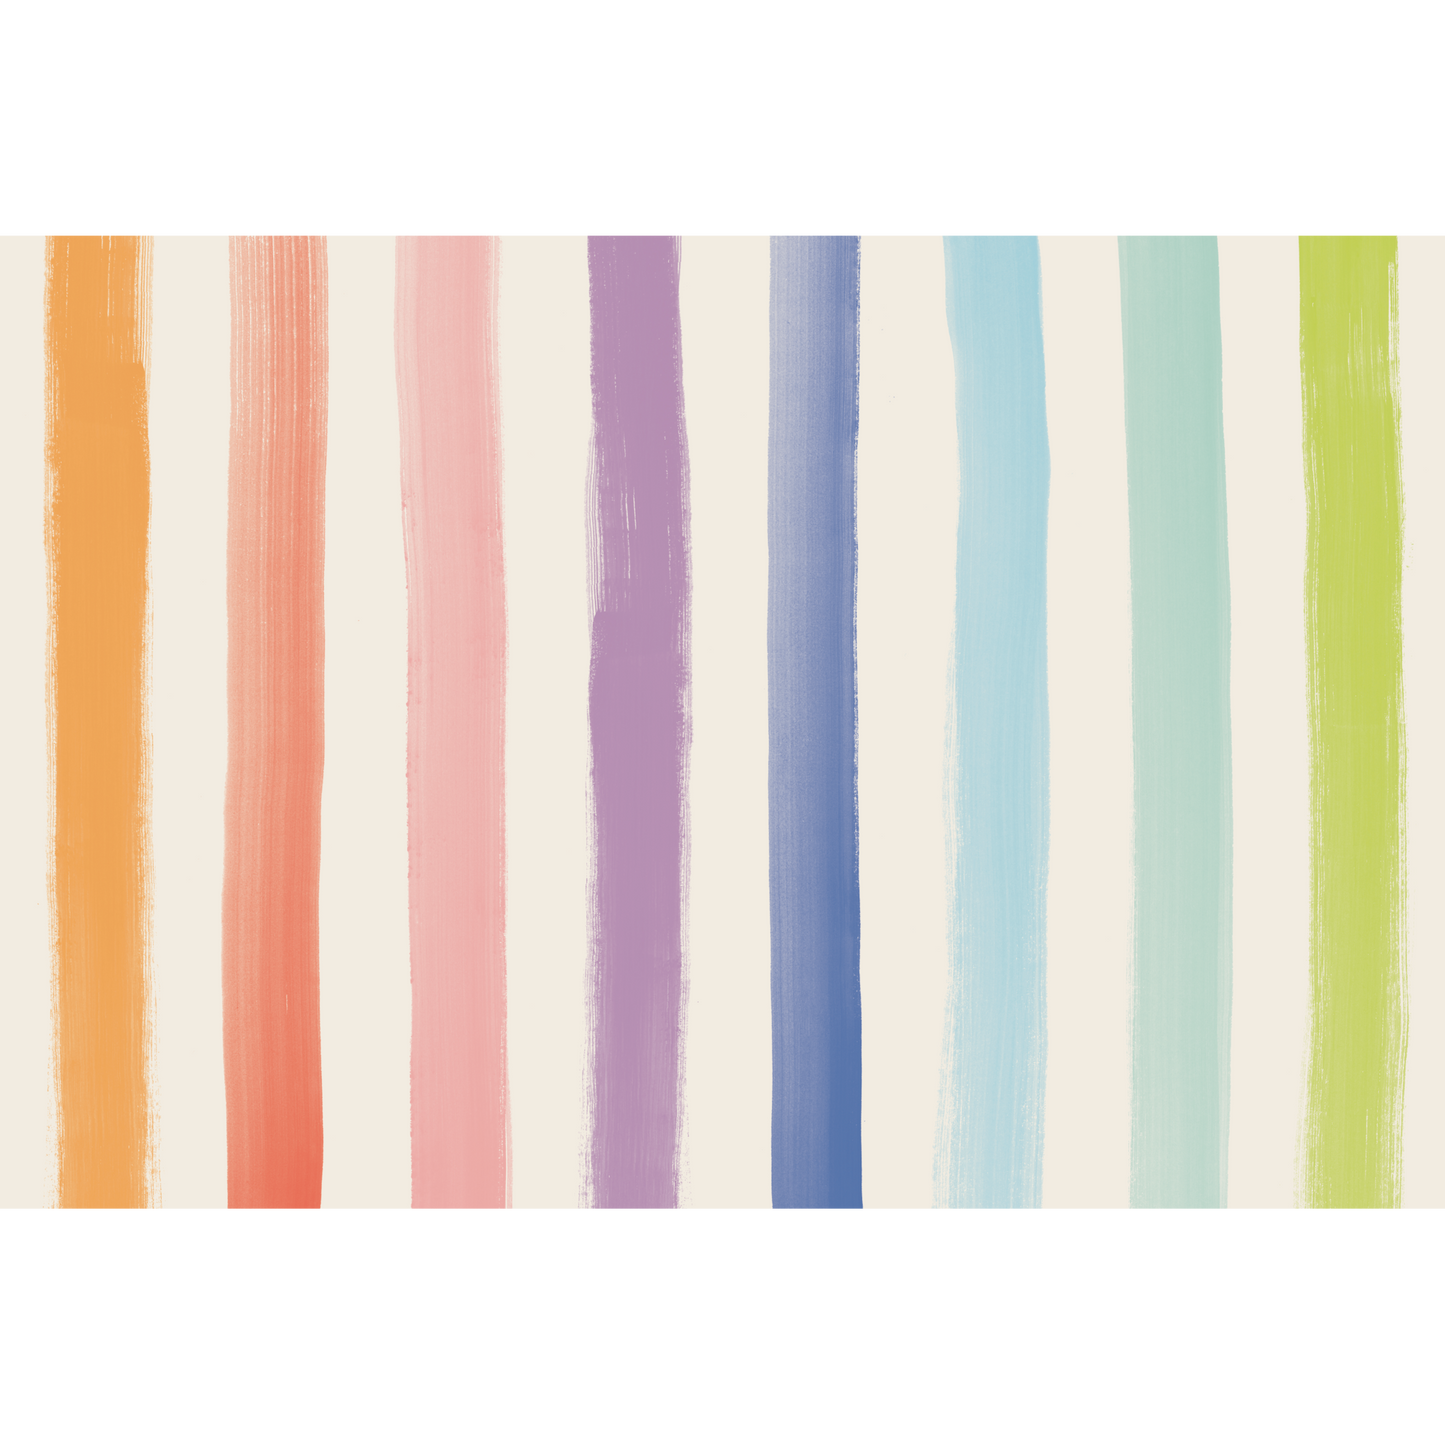 Sorbet Painted Stripe Placemat